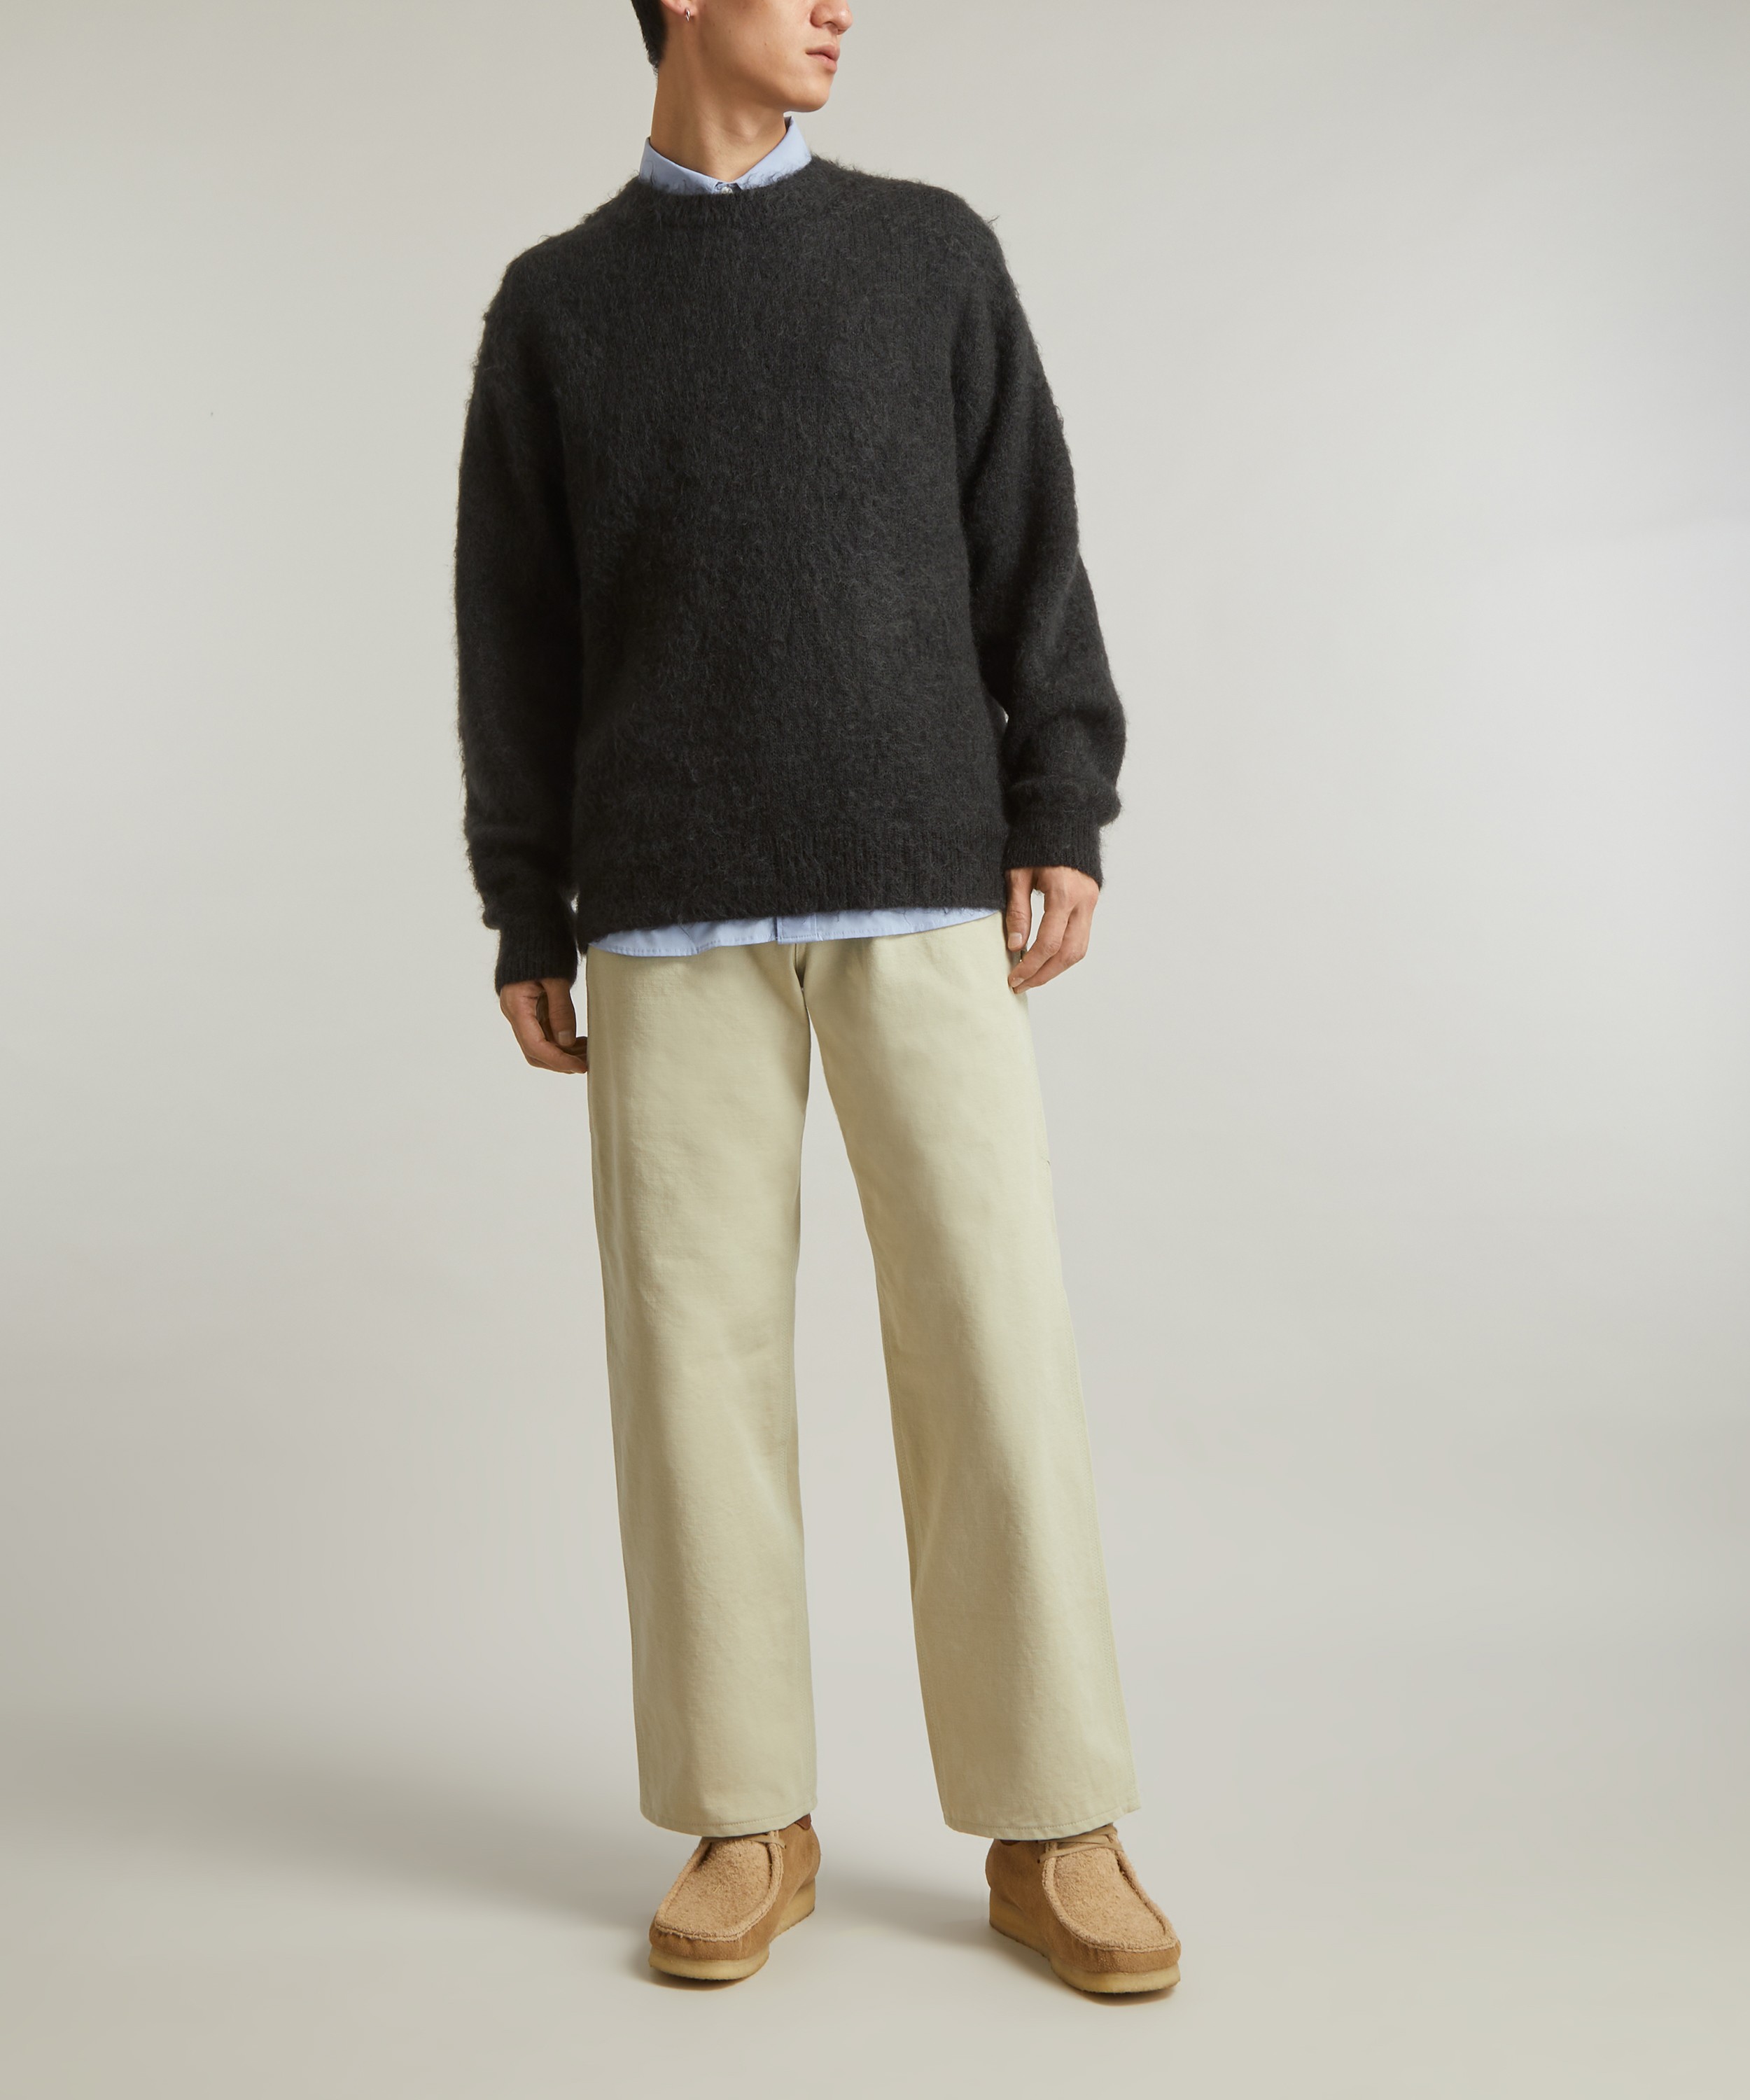 Auralee Brushed Super Kid Mohair Knit Pullover | Liberty